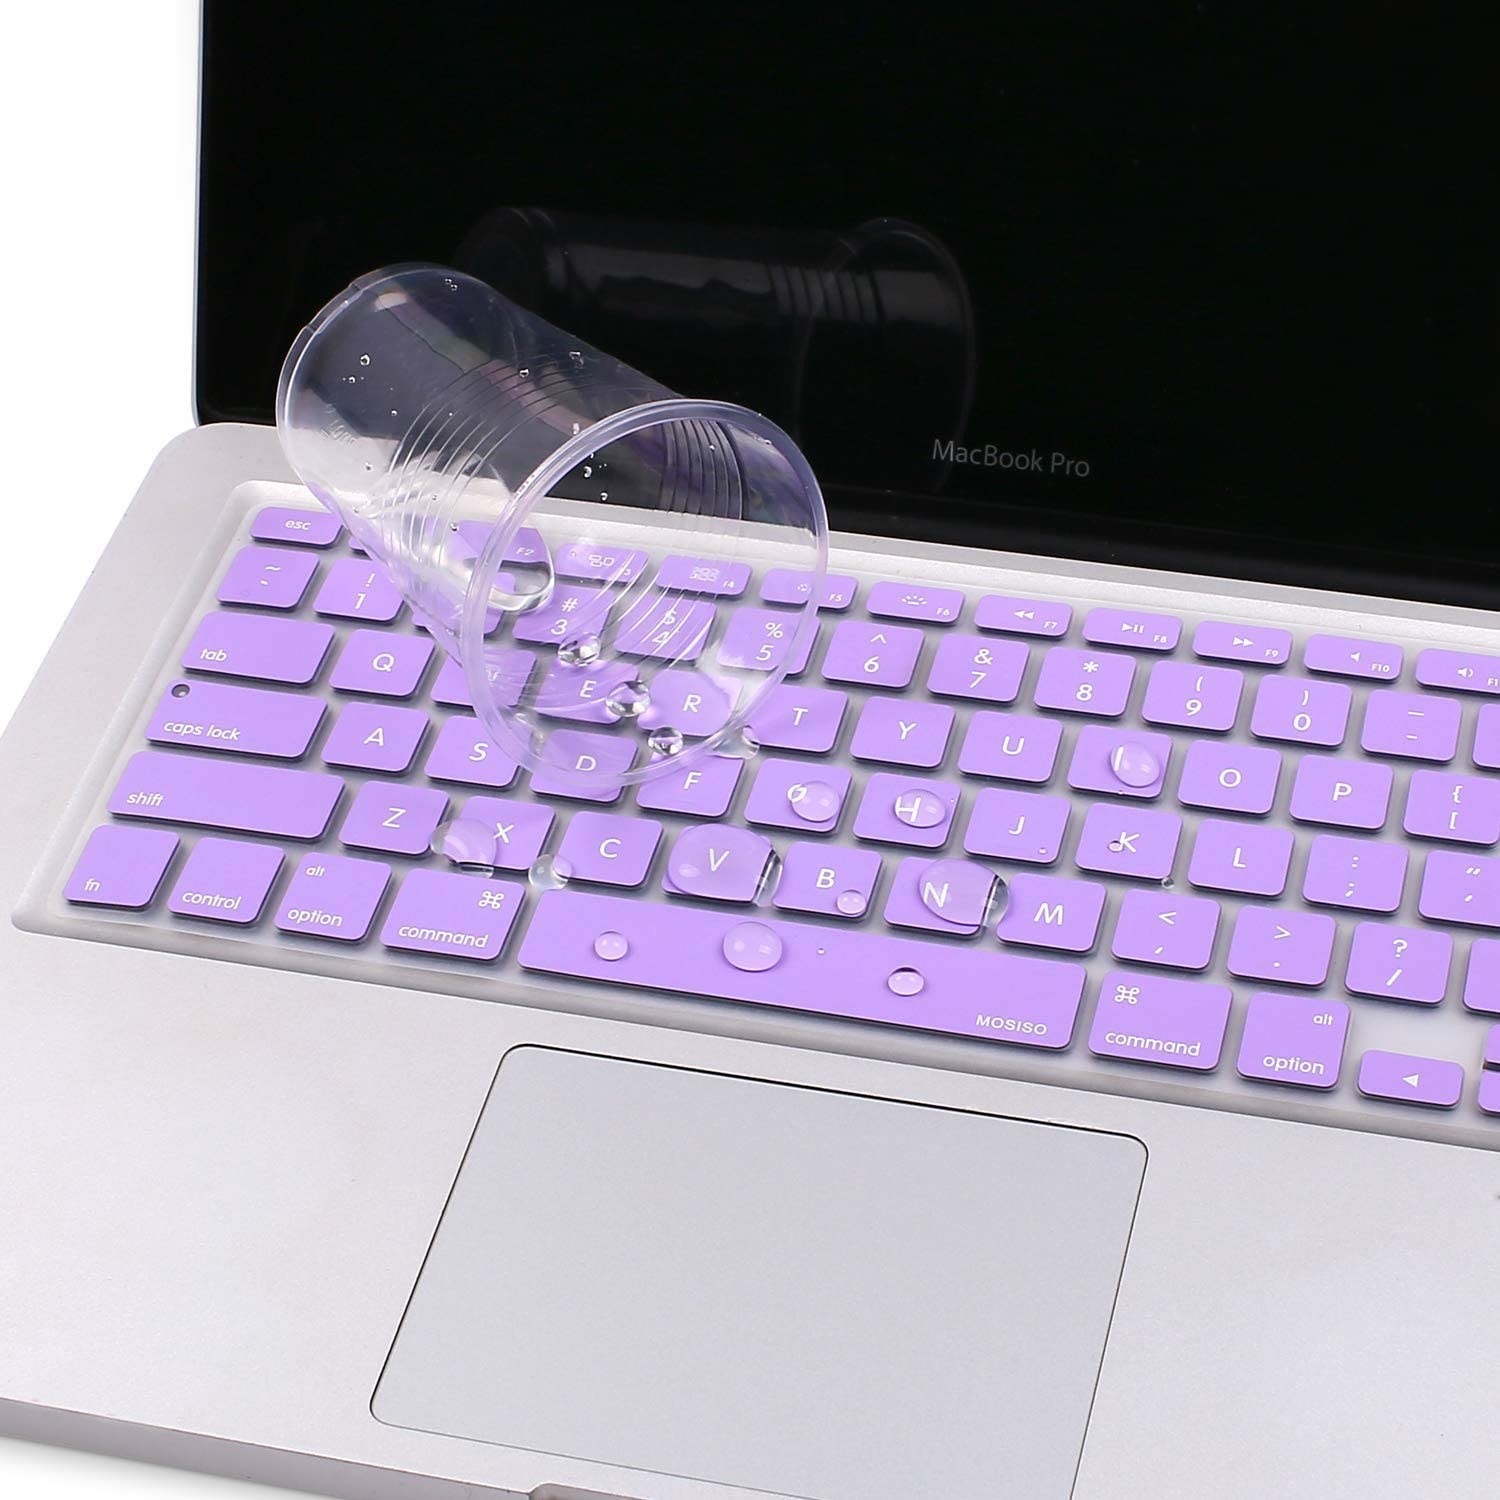 A silicone keyboard cover fitted over the laptop keys with a plastic cup with water dripping onto the laptop